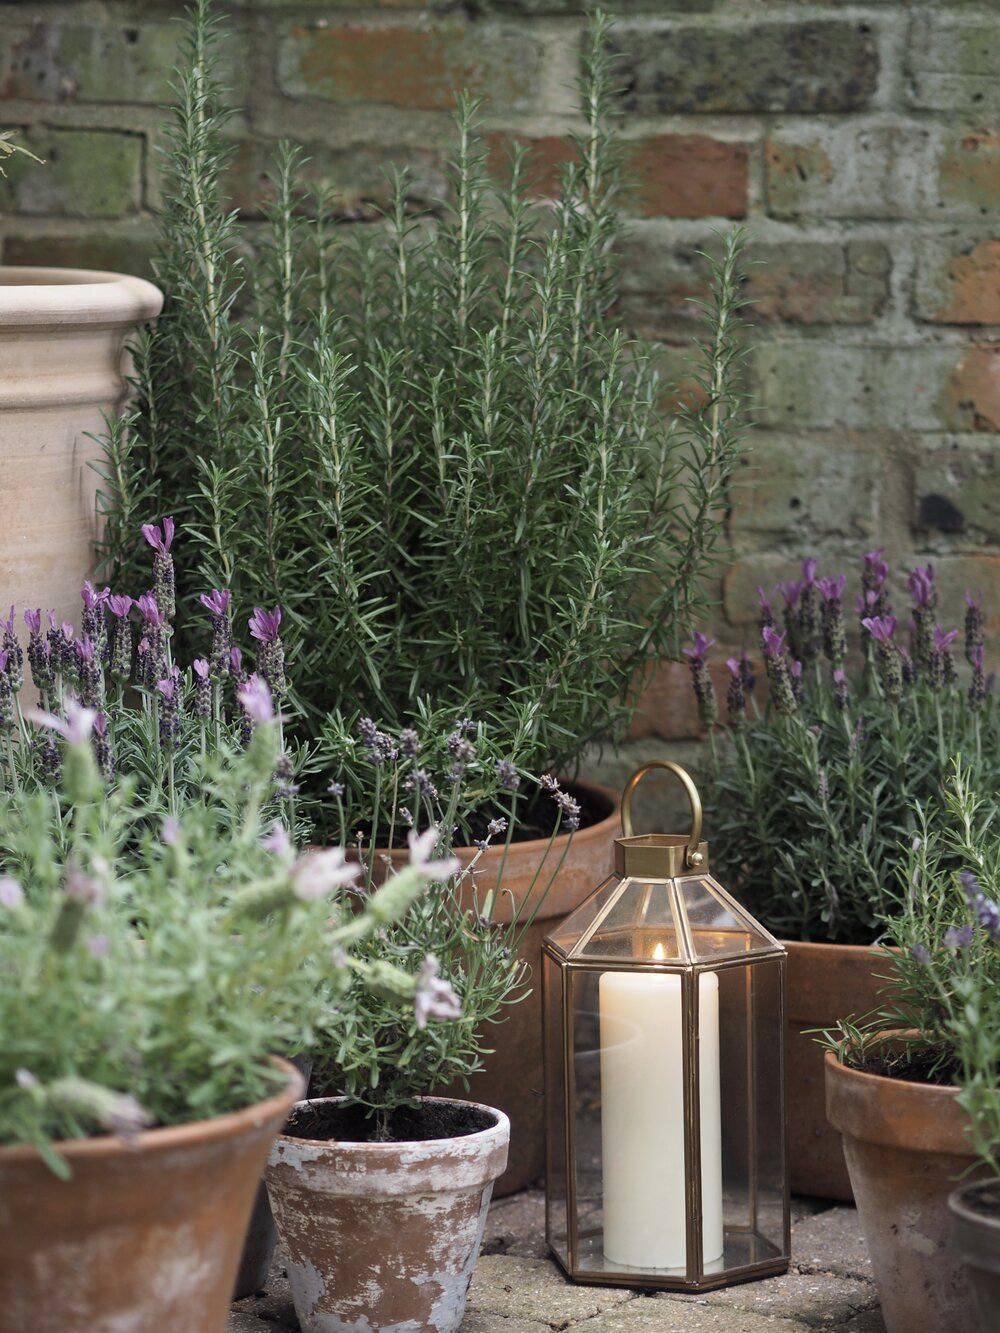 Choosing the Perfect Garden Pots for Your Plants